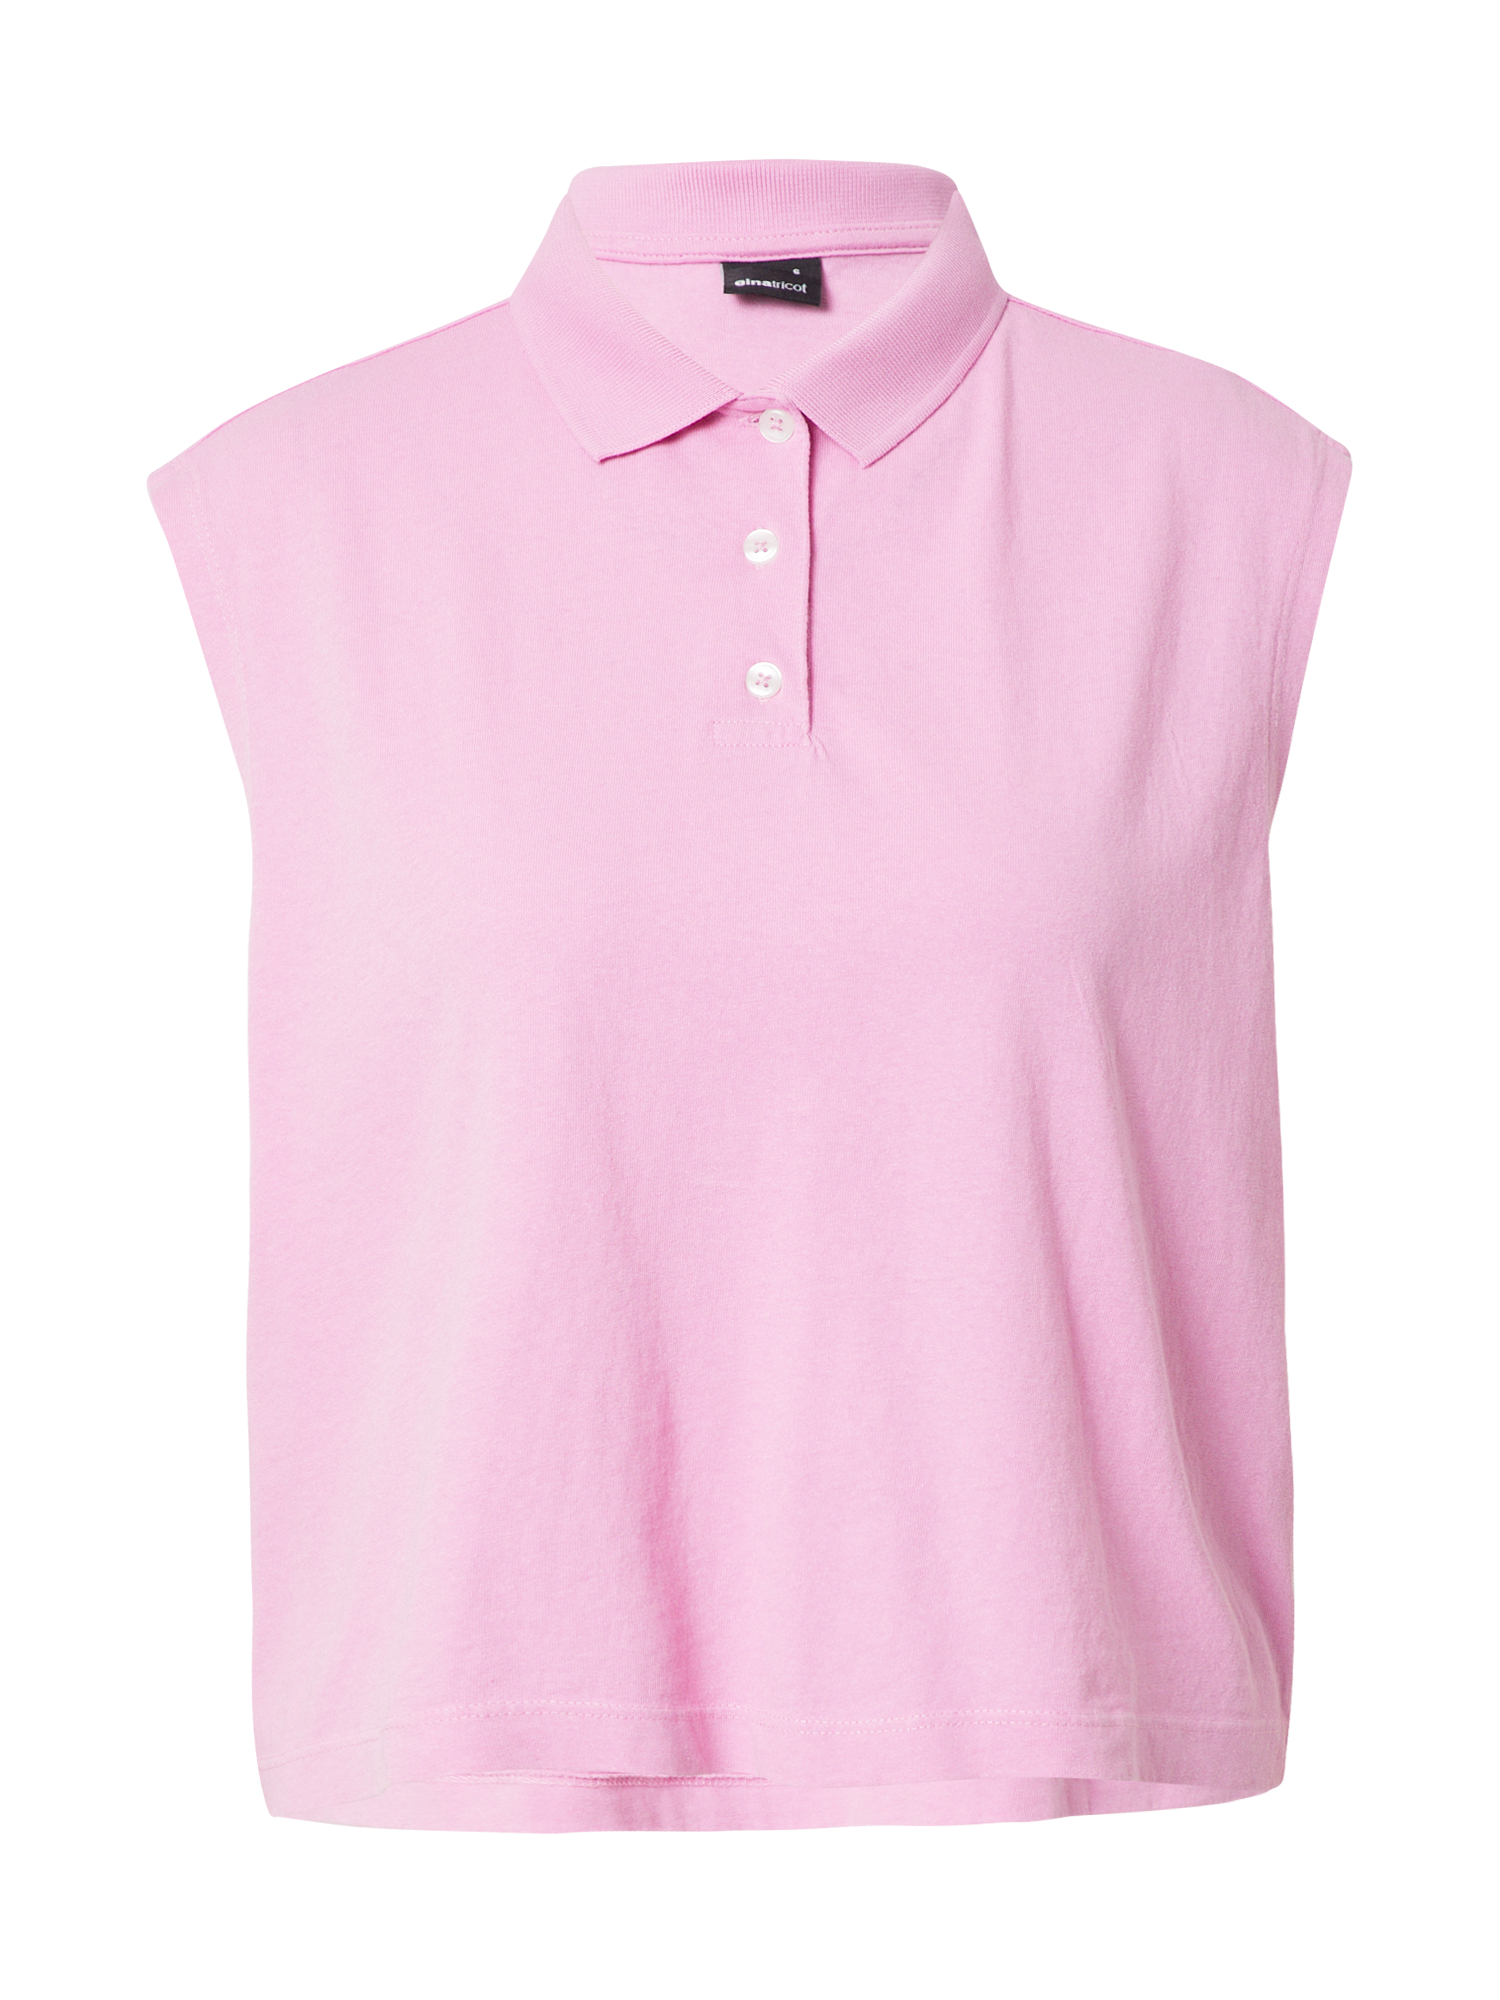 PROMO gcyLp Gina Tricot Top Charlotte in Rosa 